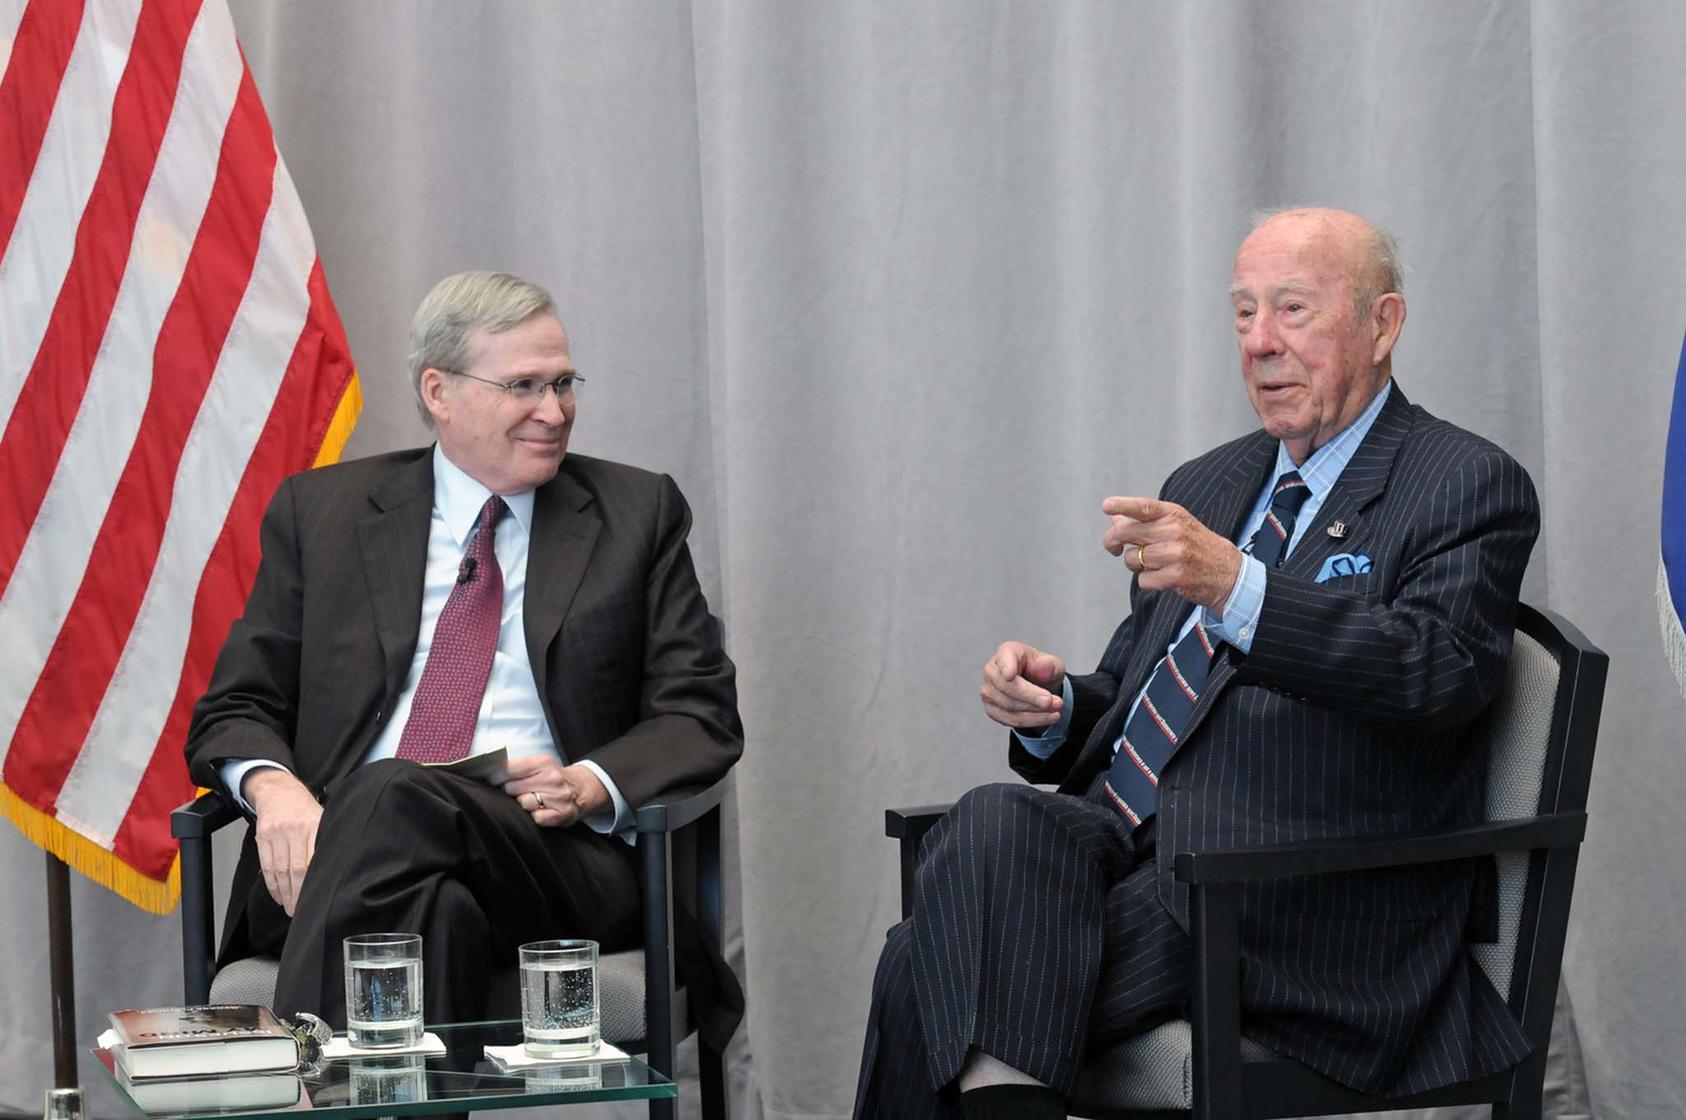 USIP Board Chair Stephen J. Hadley and George Shultz during the Dean Acheson Lecture, January 30, 2015.